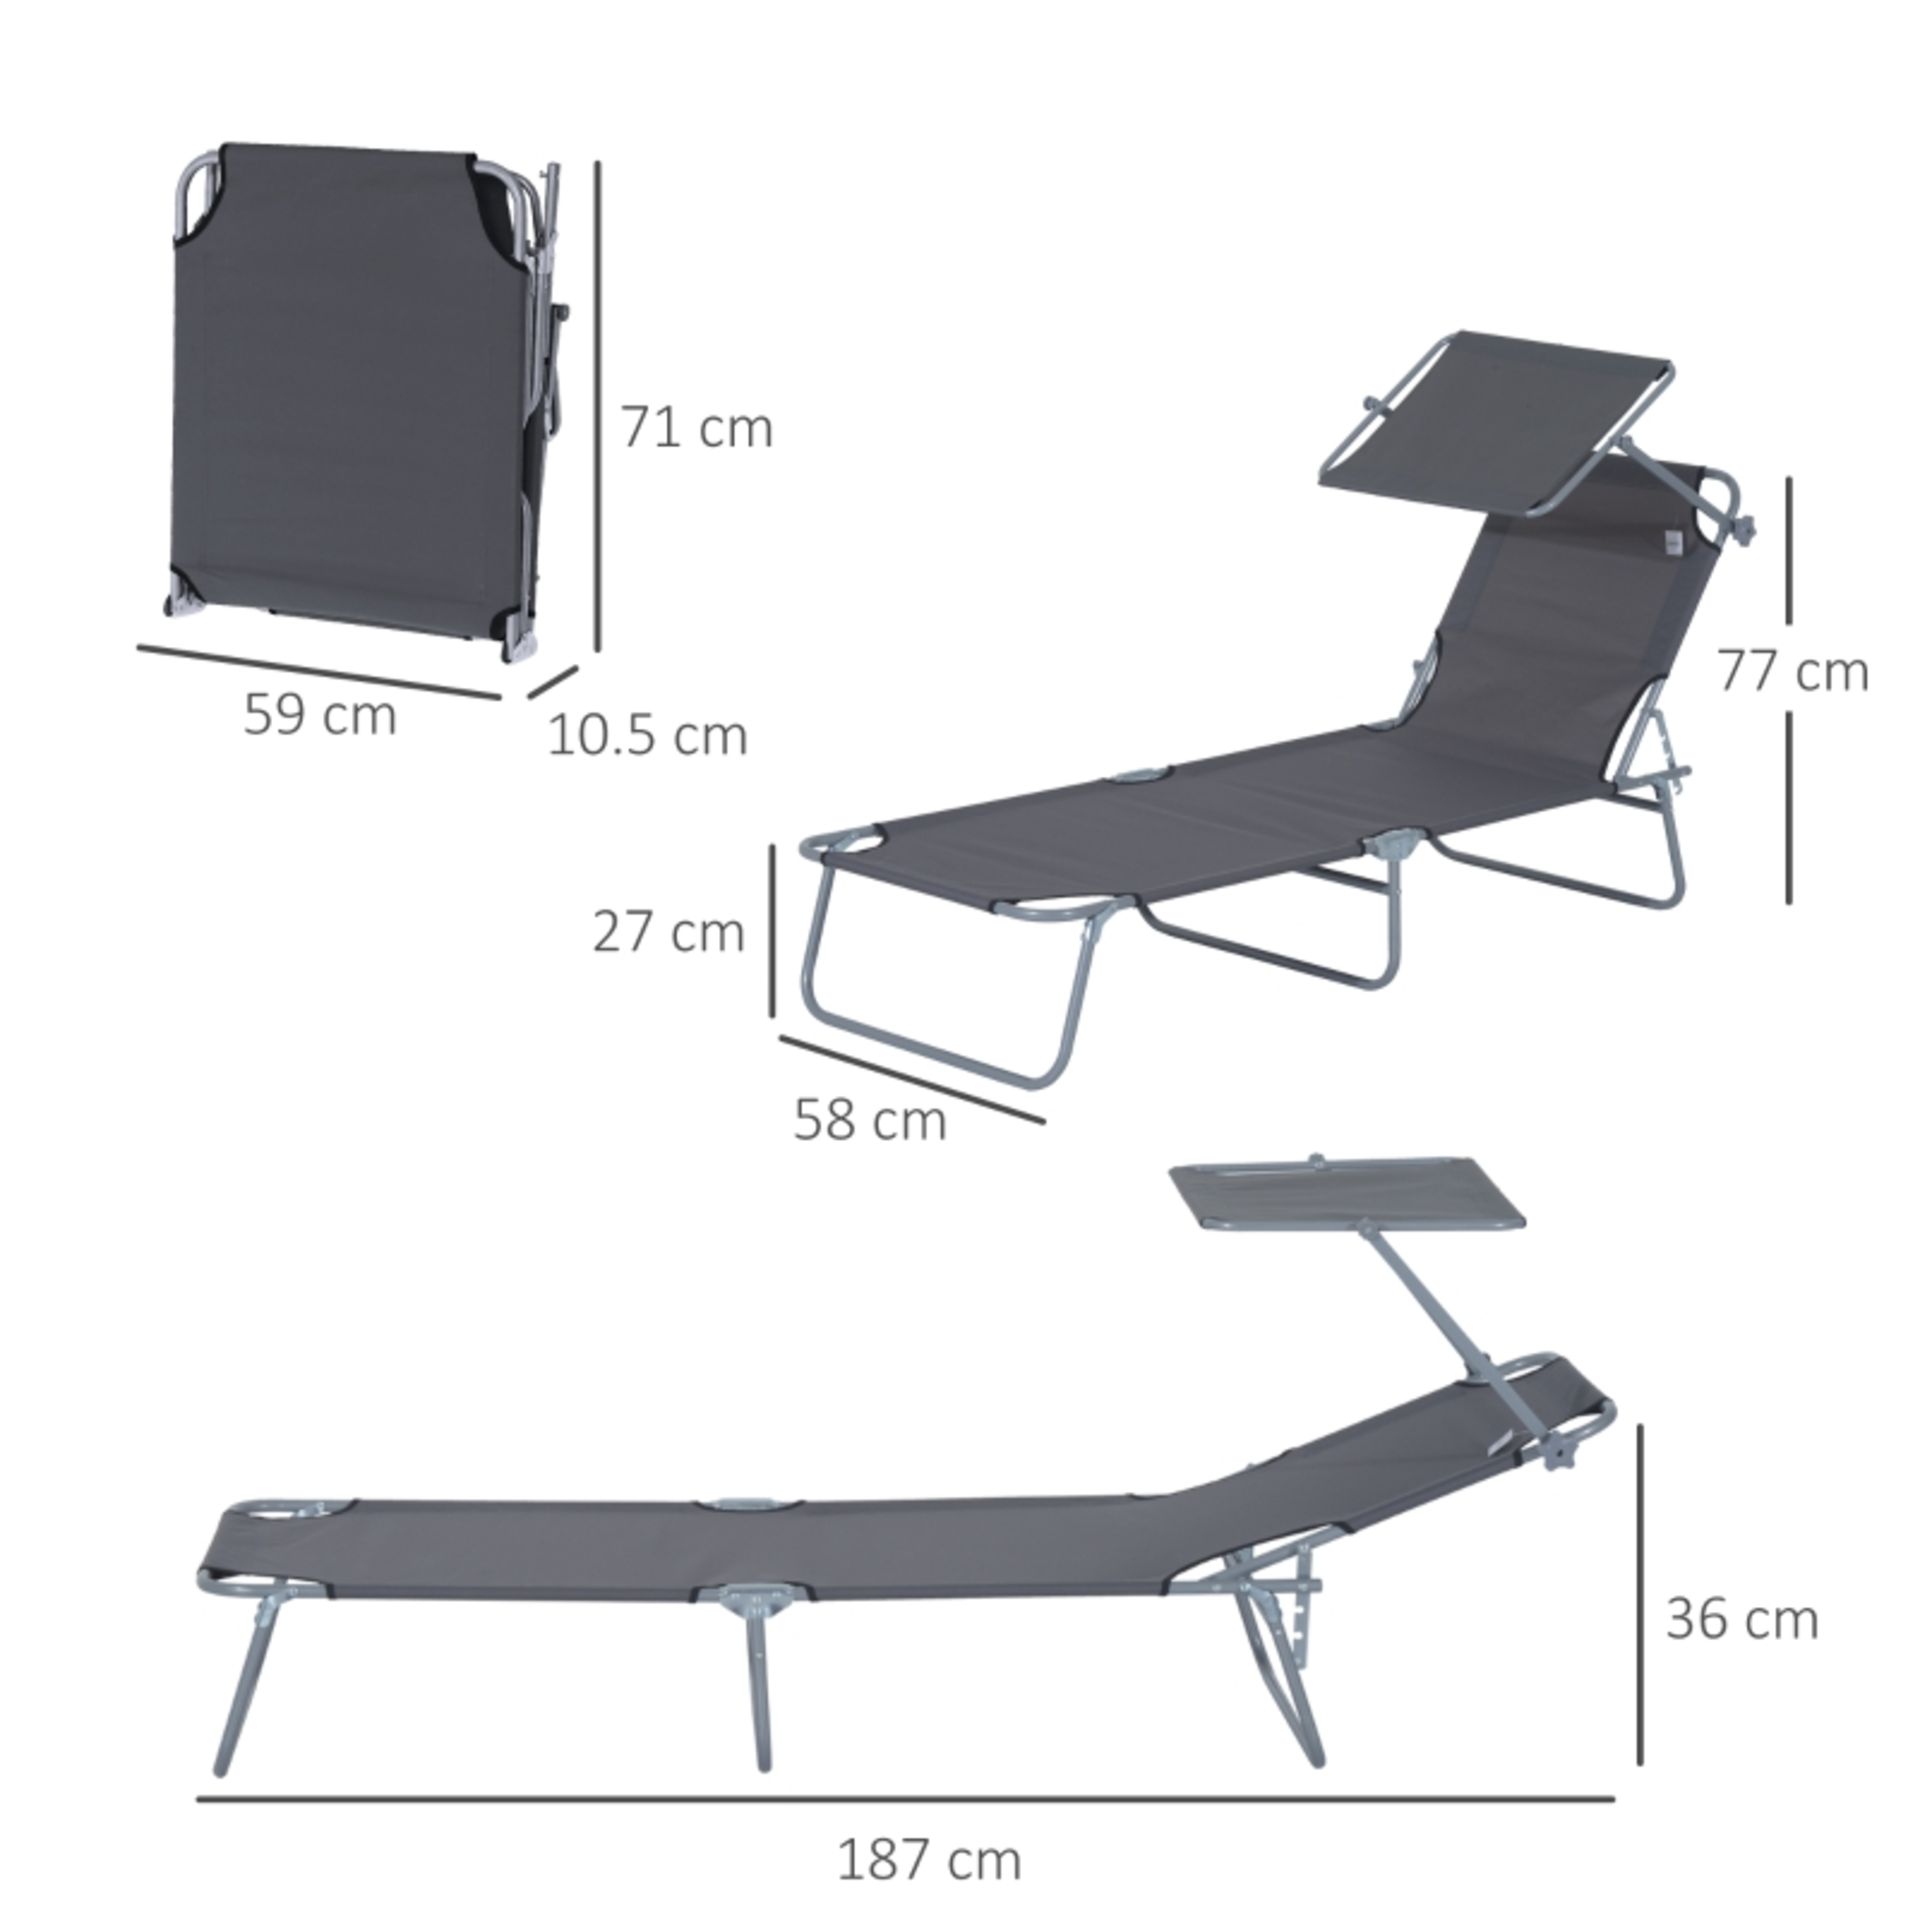 RPP £54.99 -Outsunny Reclining Chair Sun Lounger Folding Lounger Seat with Sun Shade Awning Beach - Image 3 of 4